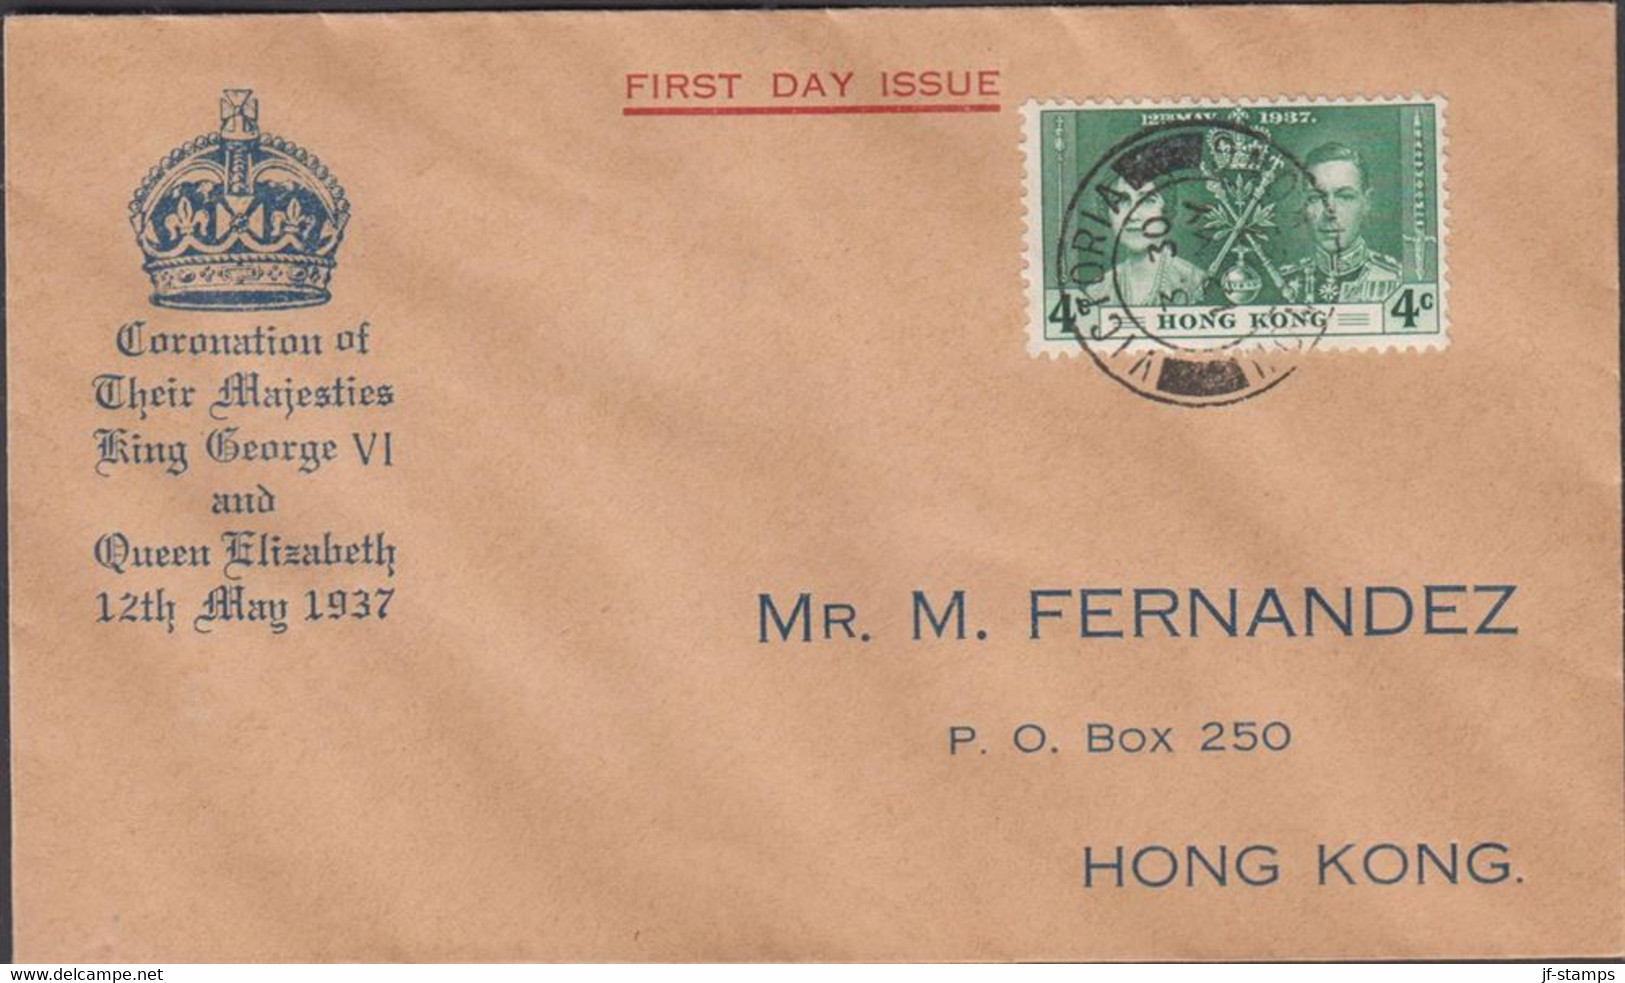 1937. HONG KONG Georg VI. 4 C Coronation On Nice FDC Cancelled FIRST DAY OF ISSUE VICTORIA HO... (Michel 136) - JF427052 - Covers & Documents